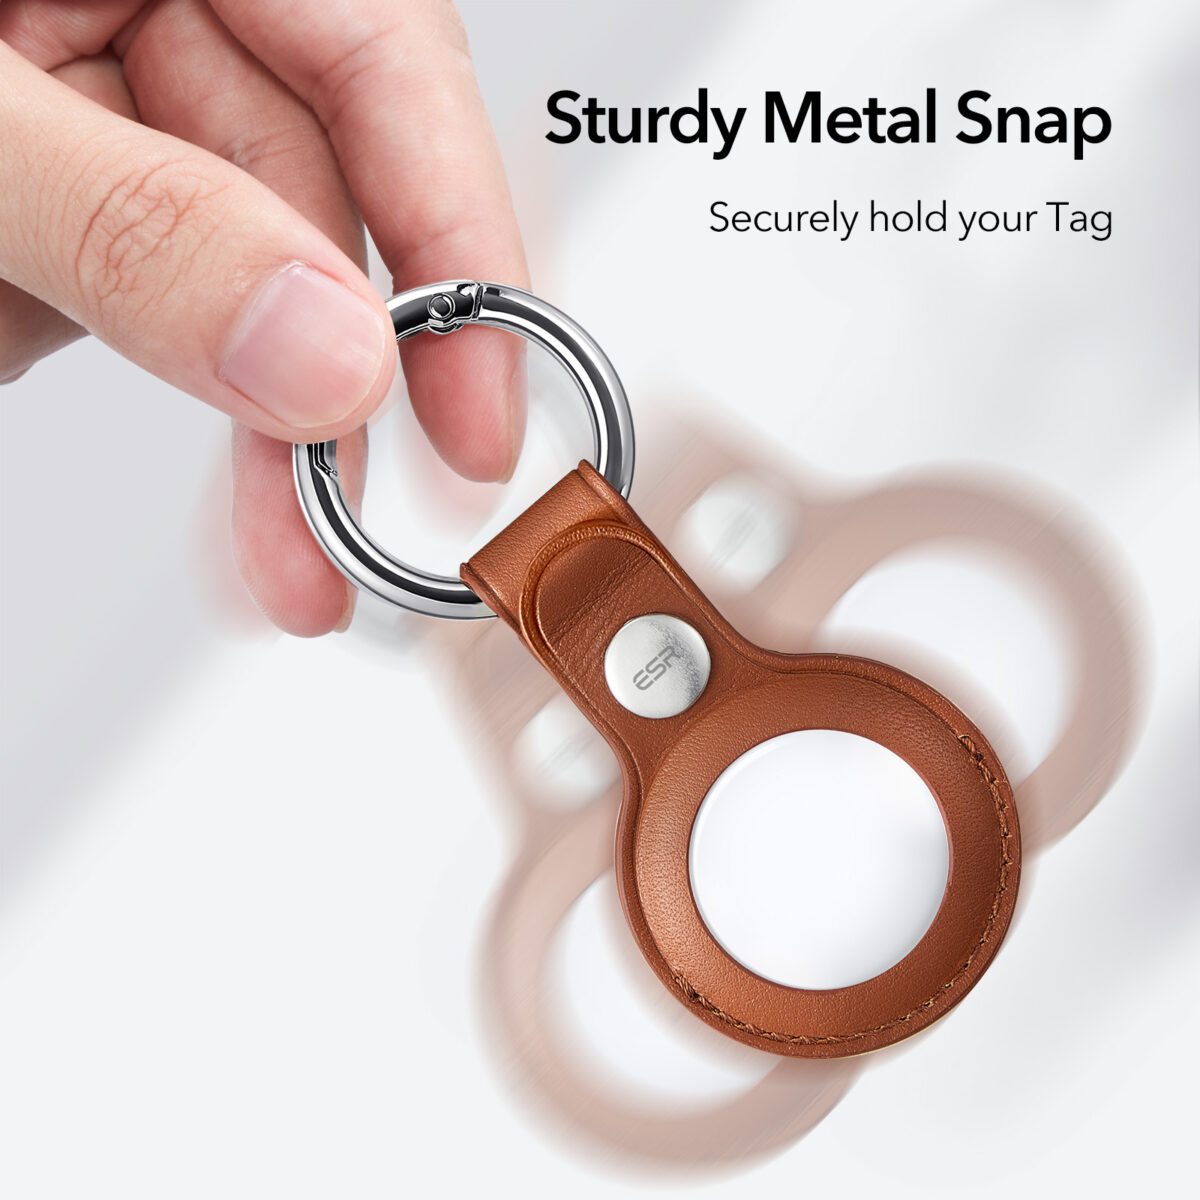 Sturday Metal Snap for AirTag